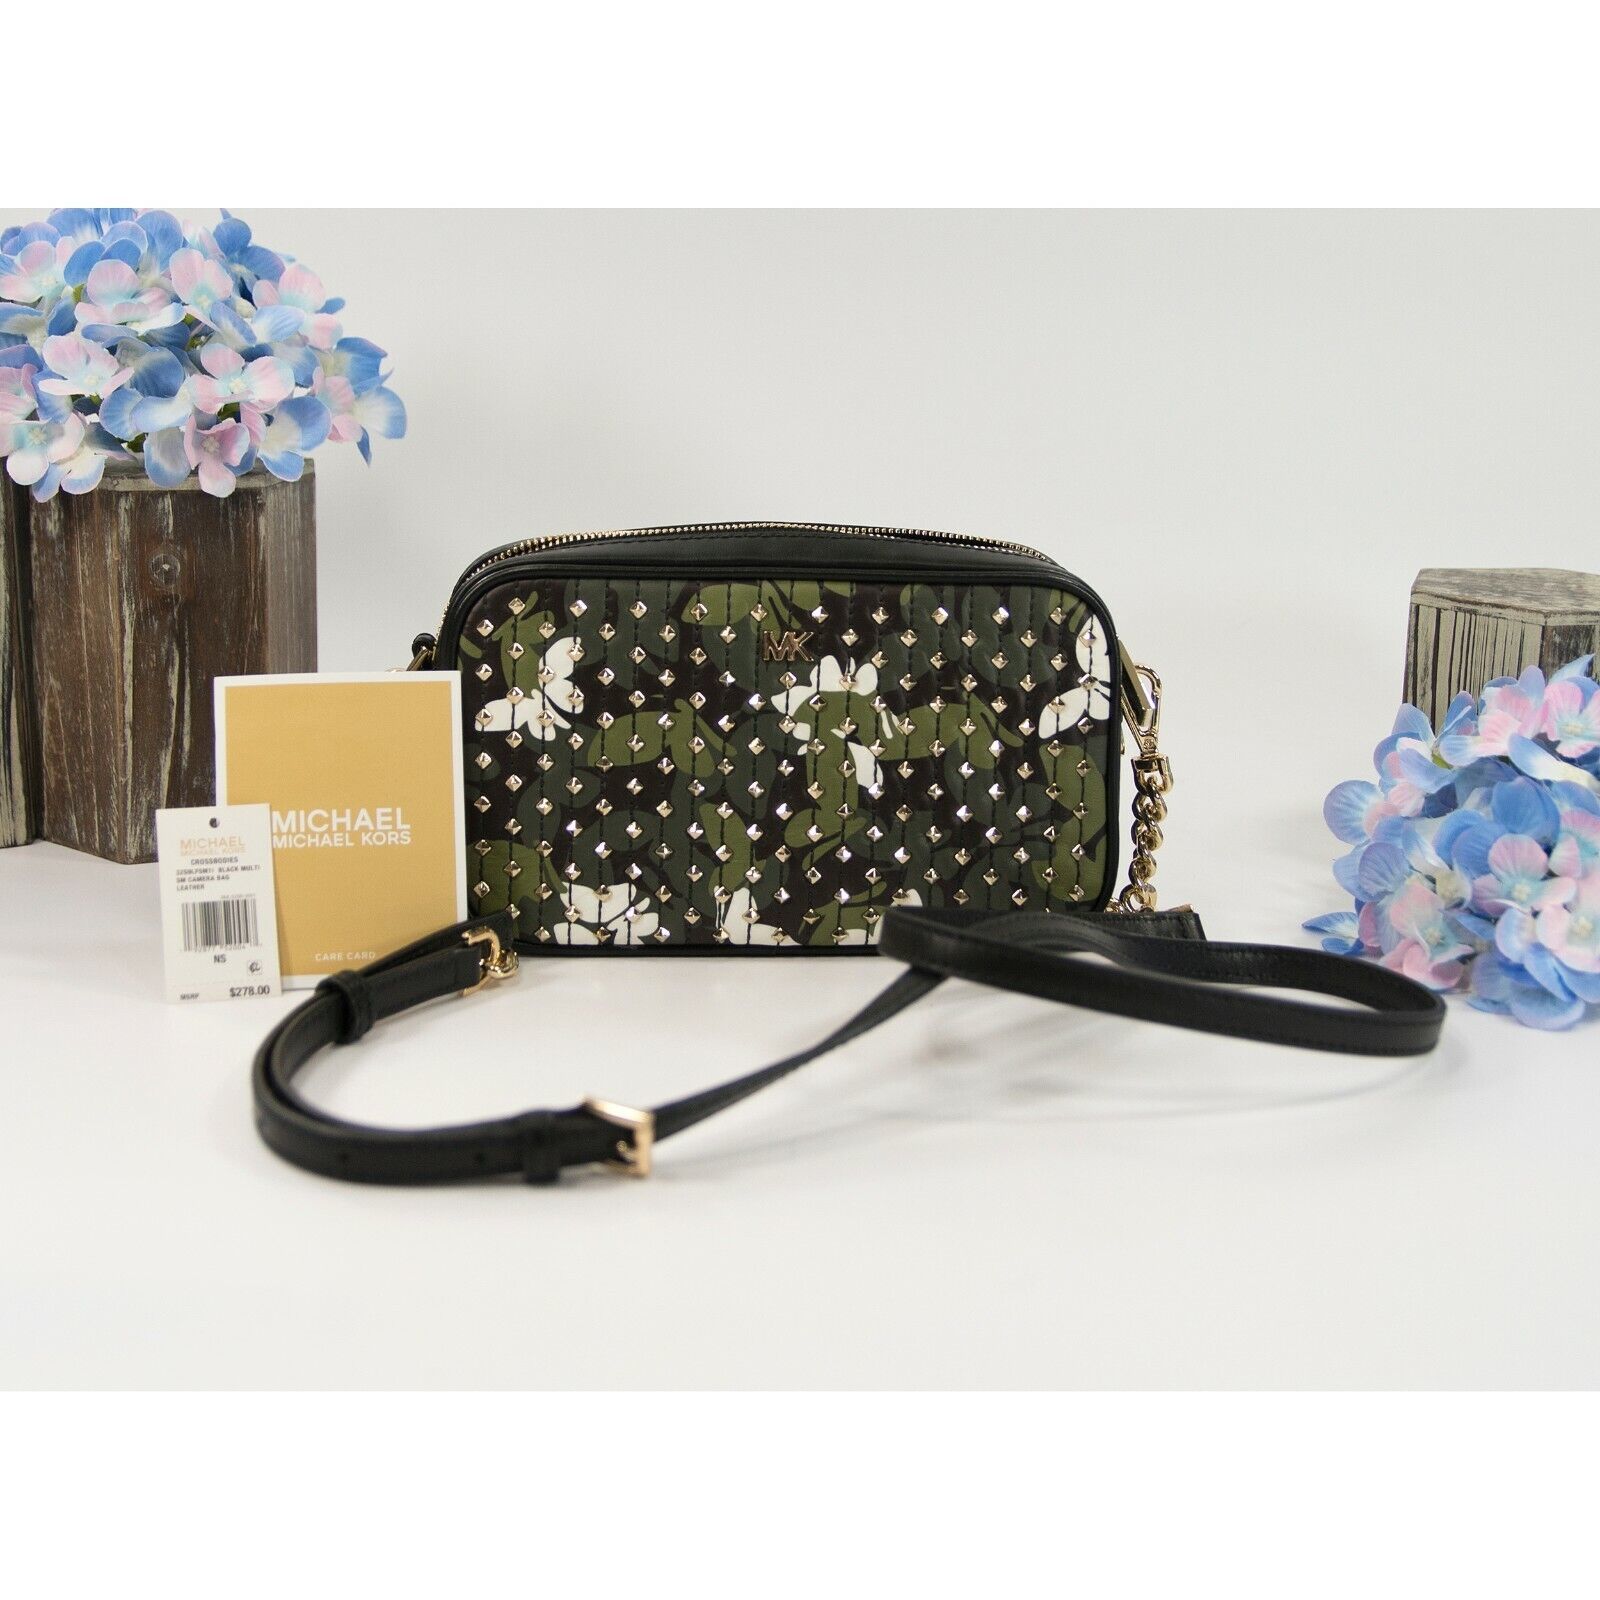 Primary image for Michael Kors Studded Butterfly Double Zip Leather Camera Crossbody Bag NWT